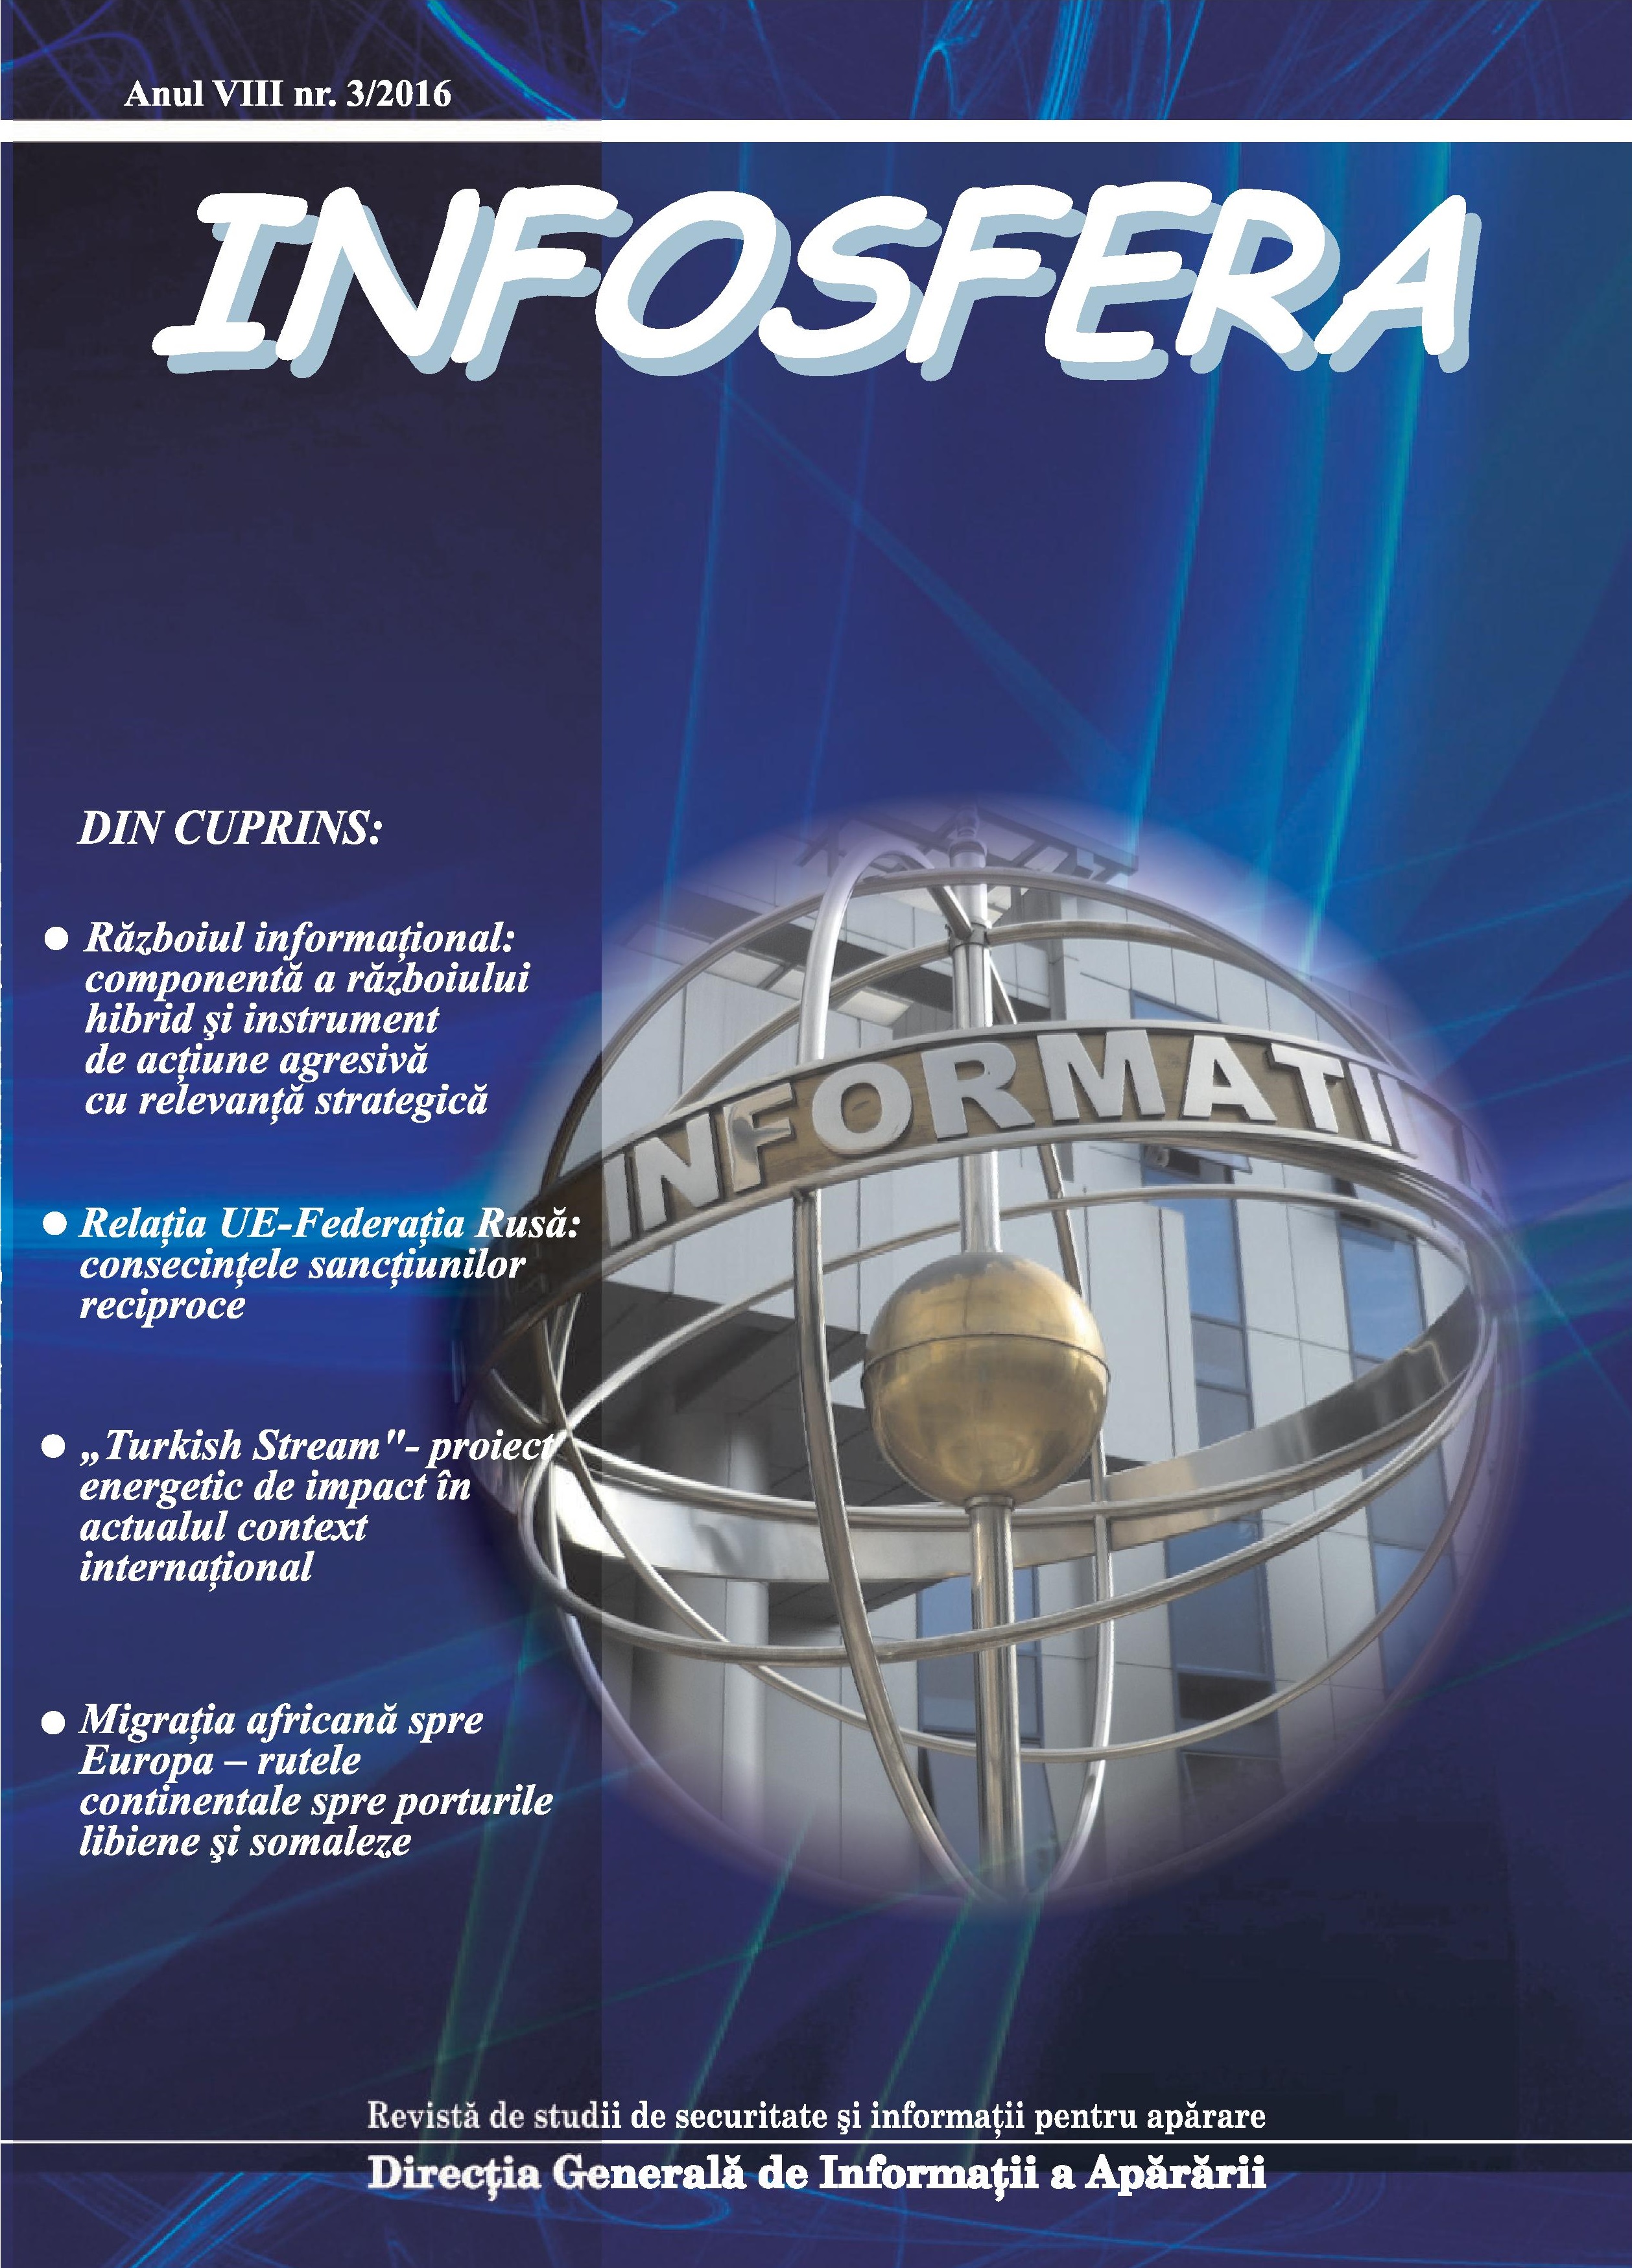 Information warfare: a component of hybrid warfare and an instrument of aggressive
action with strategic relevance Cover Image